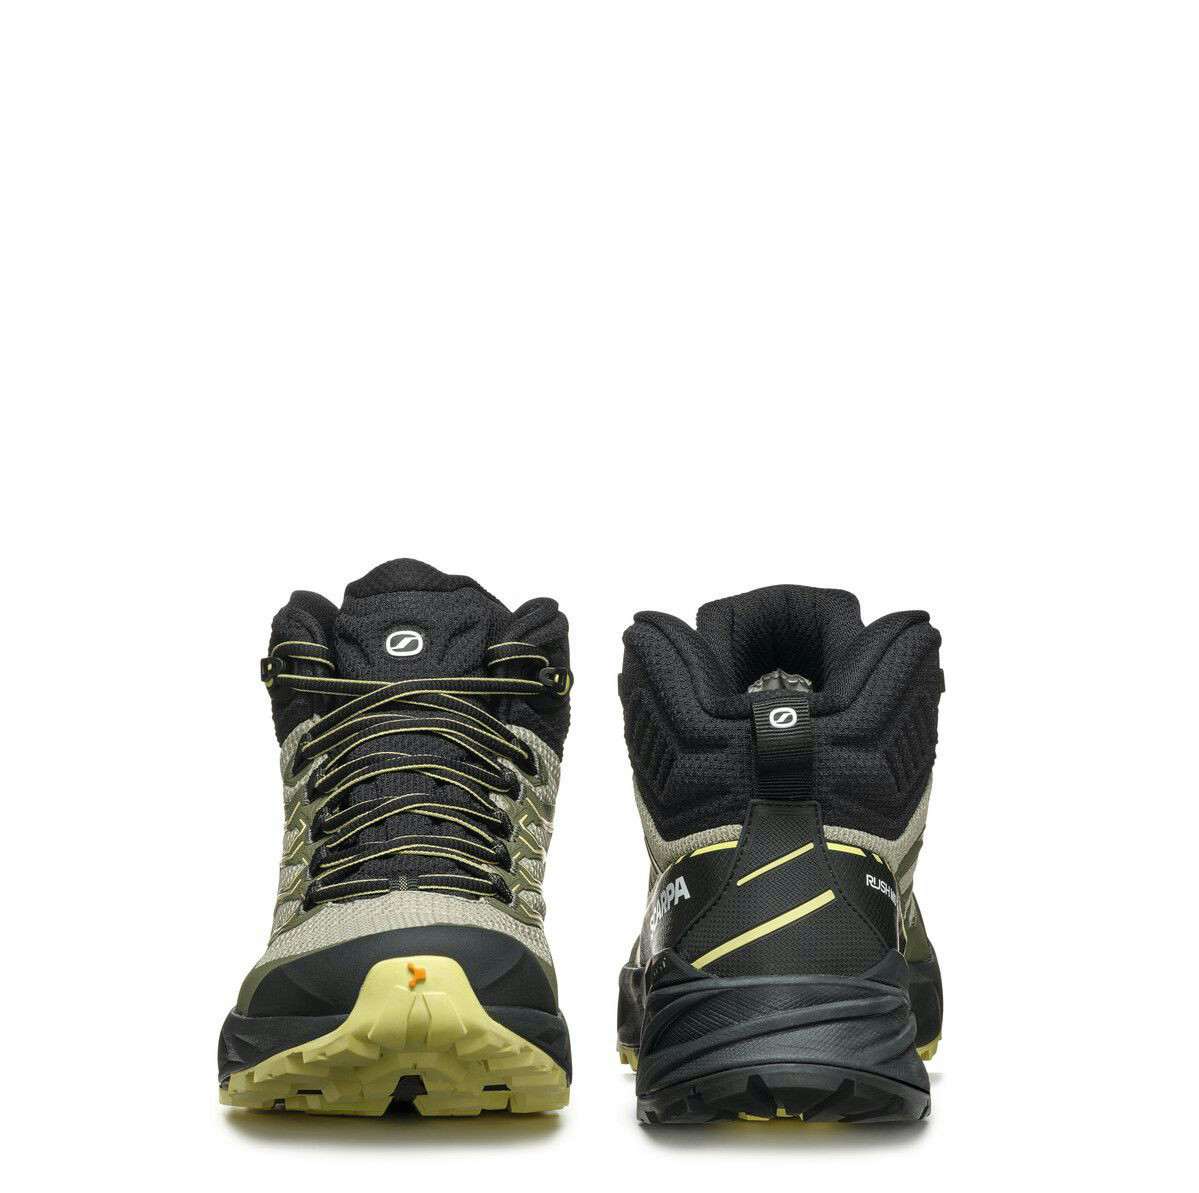 Rush 2 Mid Gore-Tex Light Trail Shoes Sage/Dusty Yellow